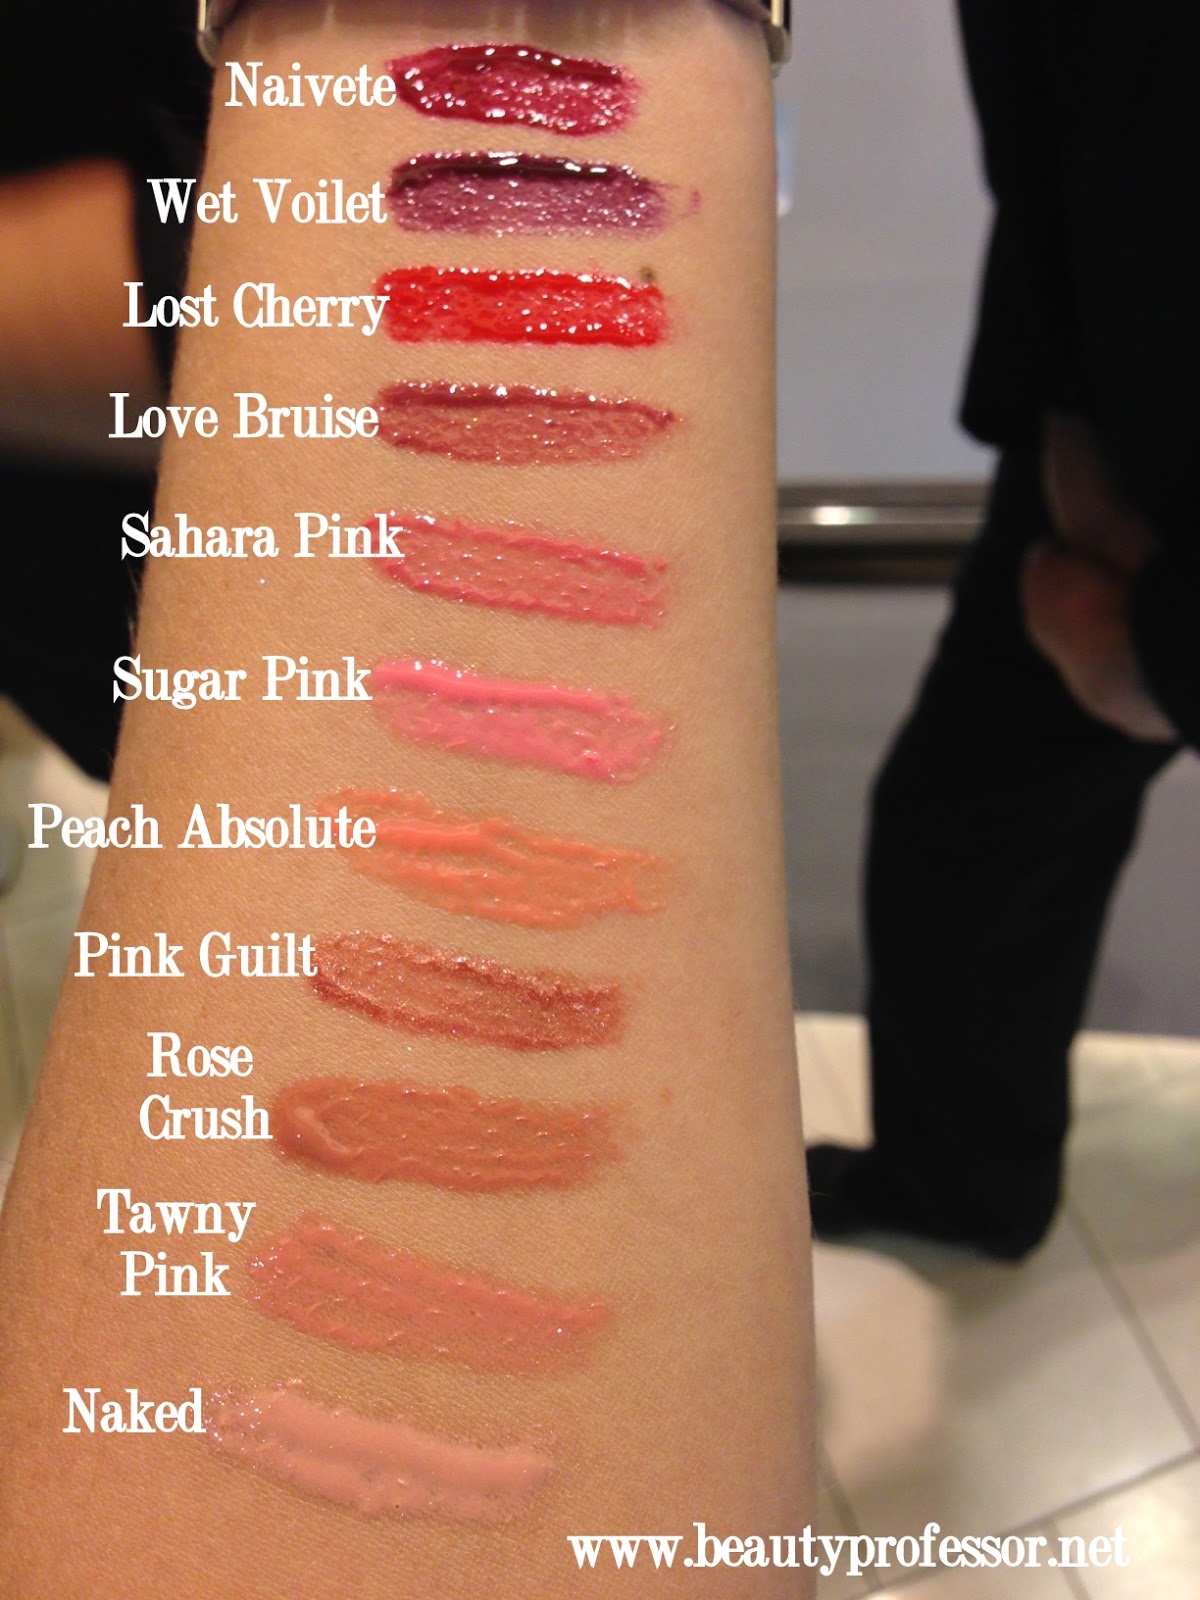 Tom Ford Ultra Shine Lip Gloss: Swatches of ALL Shades! - Beauty Professor